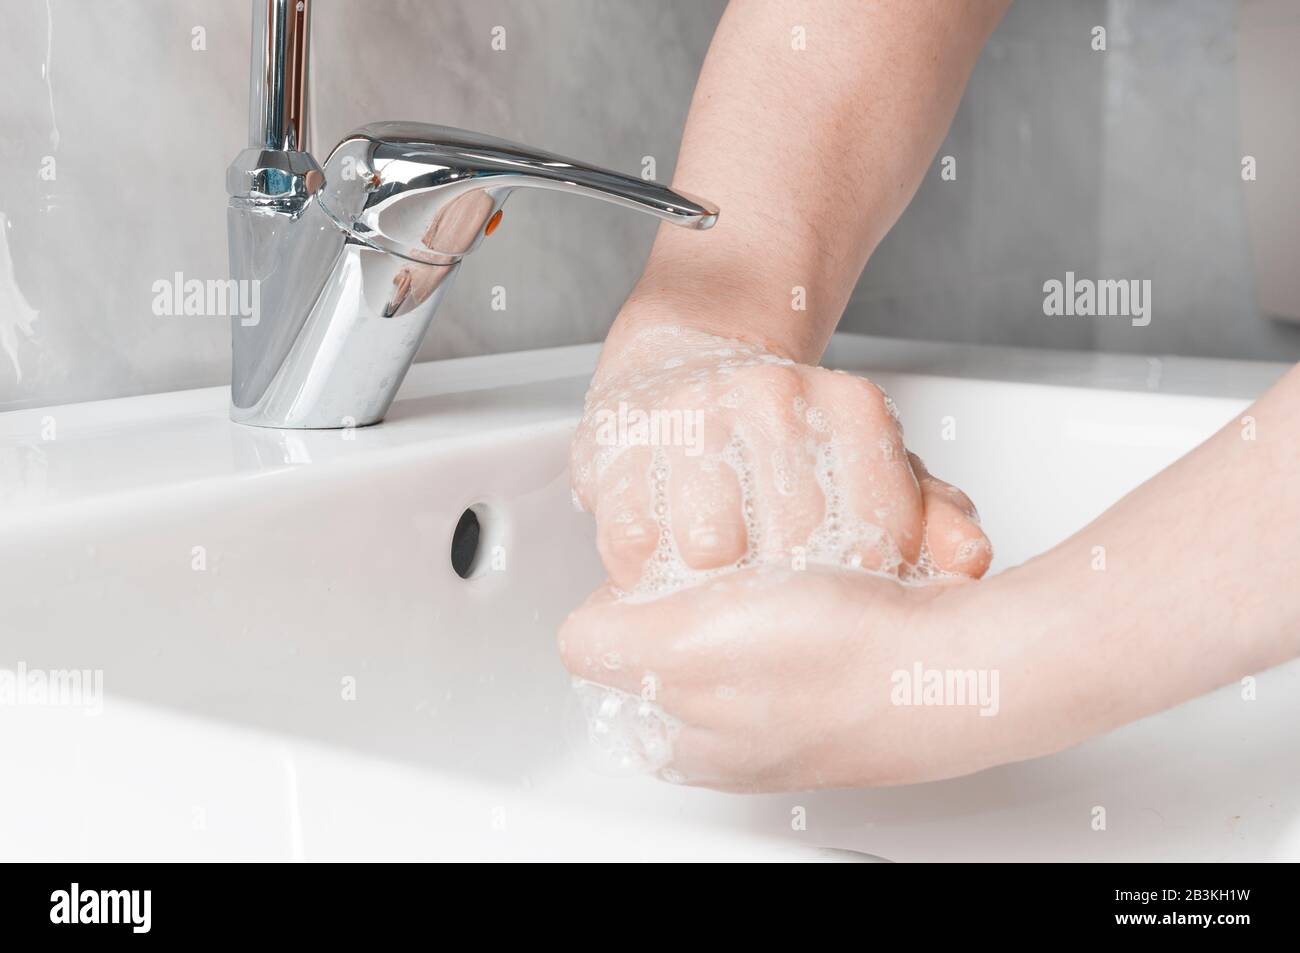 Effective handwashing techniques: rub palm with back of other hand's fingers. Hand washing is very important to avoid the risk of contagion from coron Stock Photo